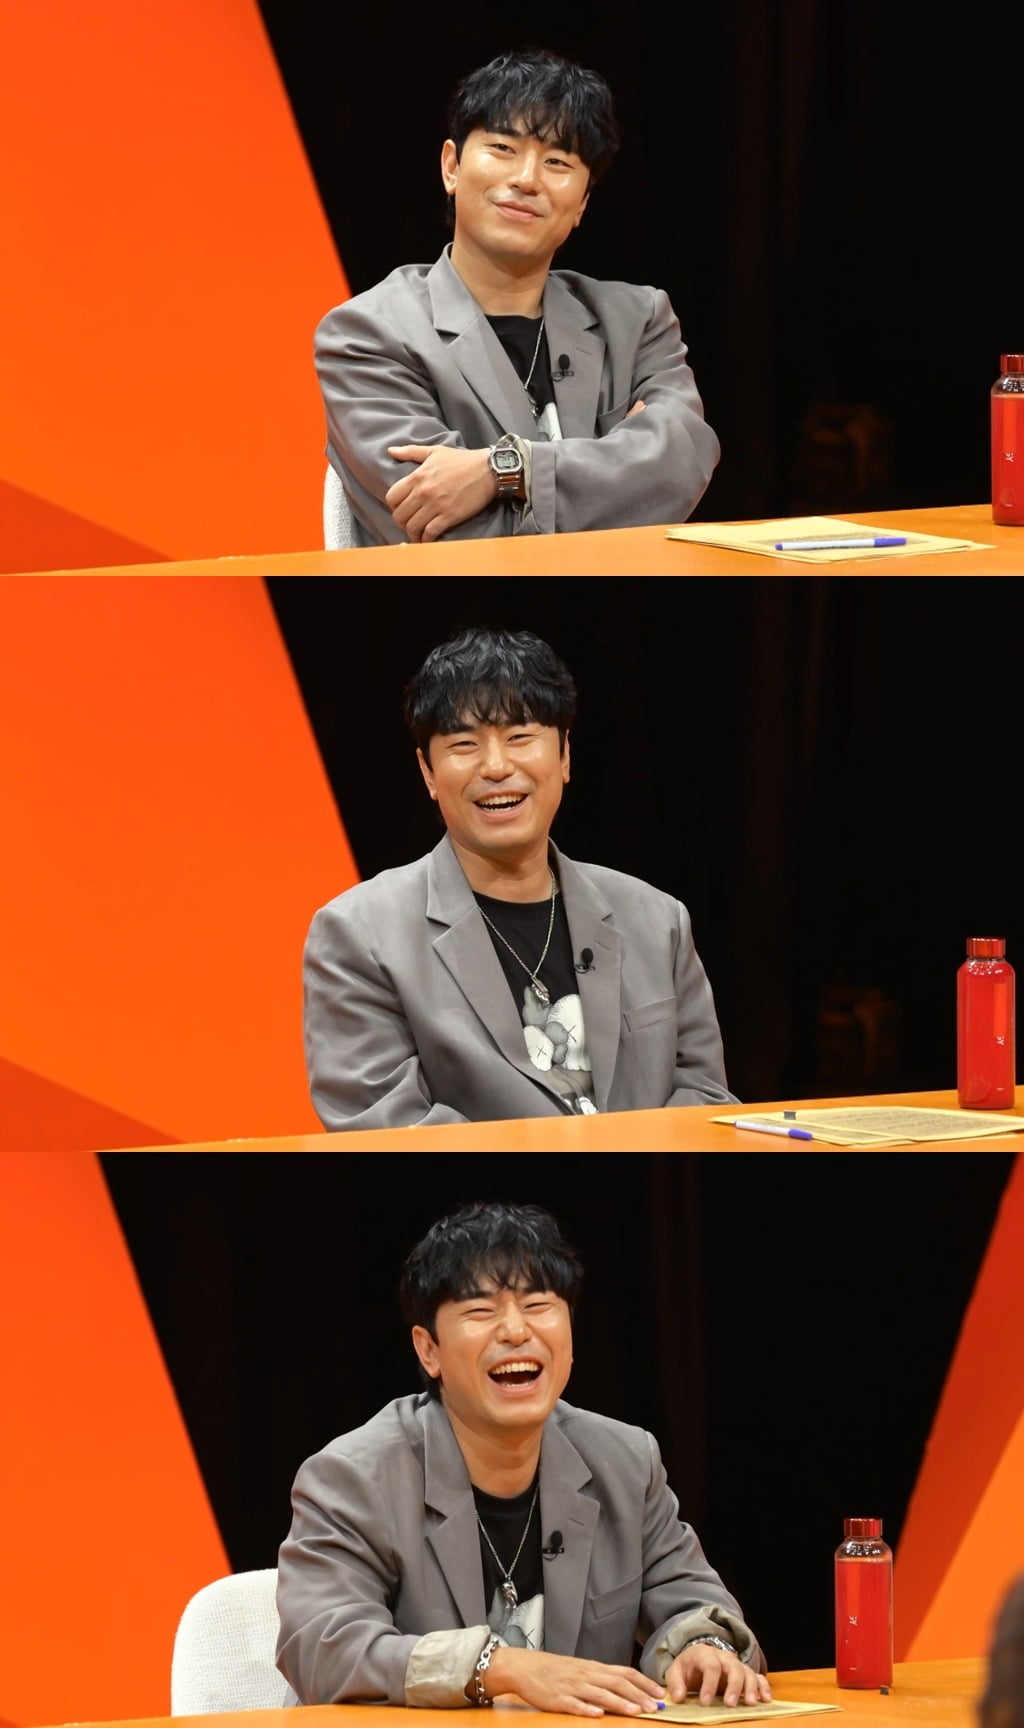 Lee Si-eon, “Han Hye-jin has a personality problem, I don’t plan to blind date her.”